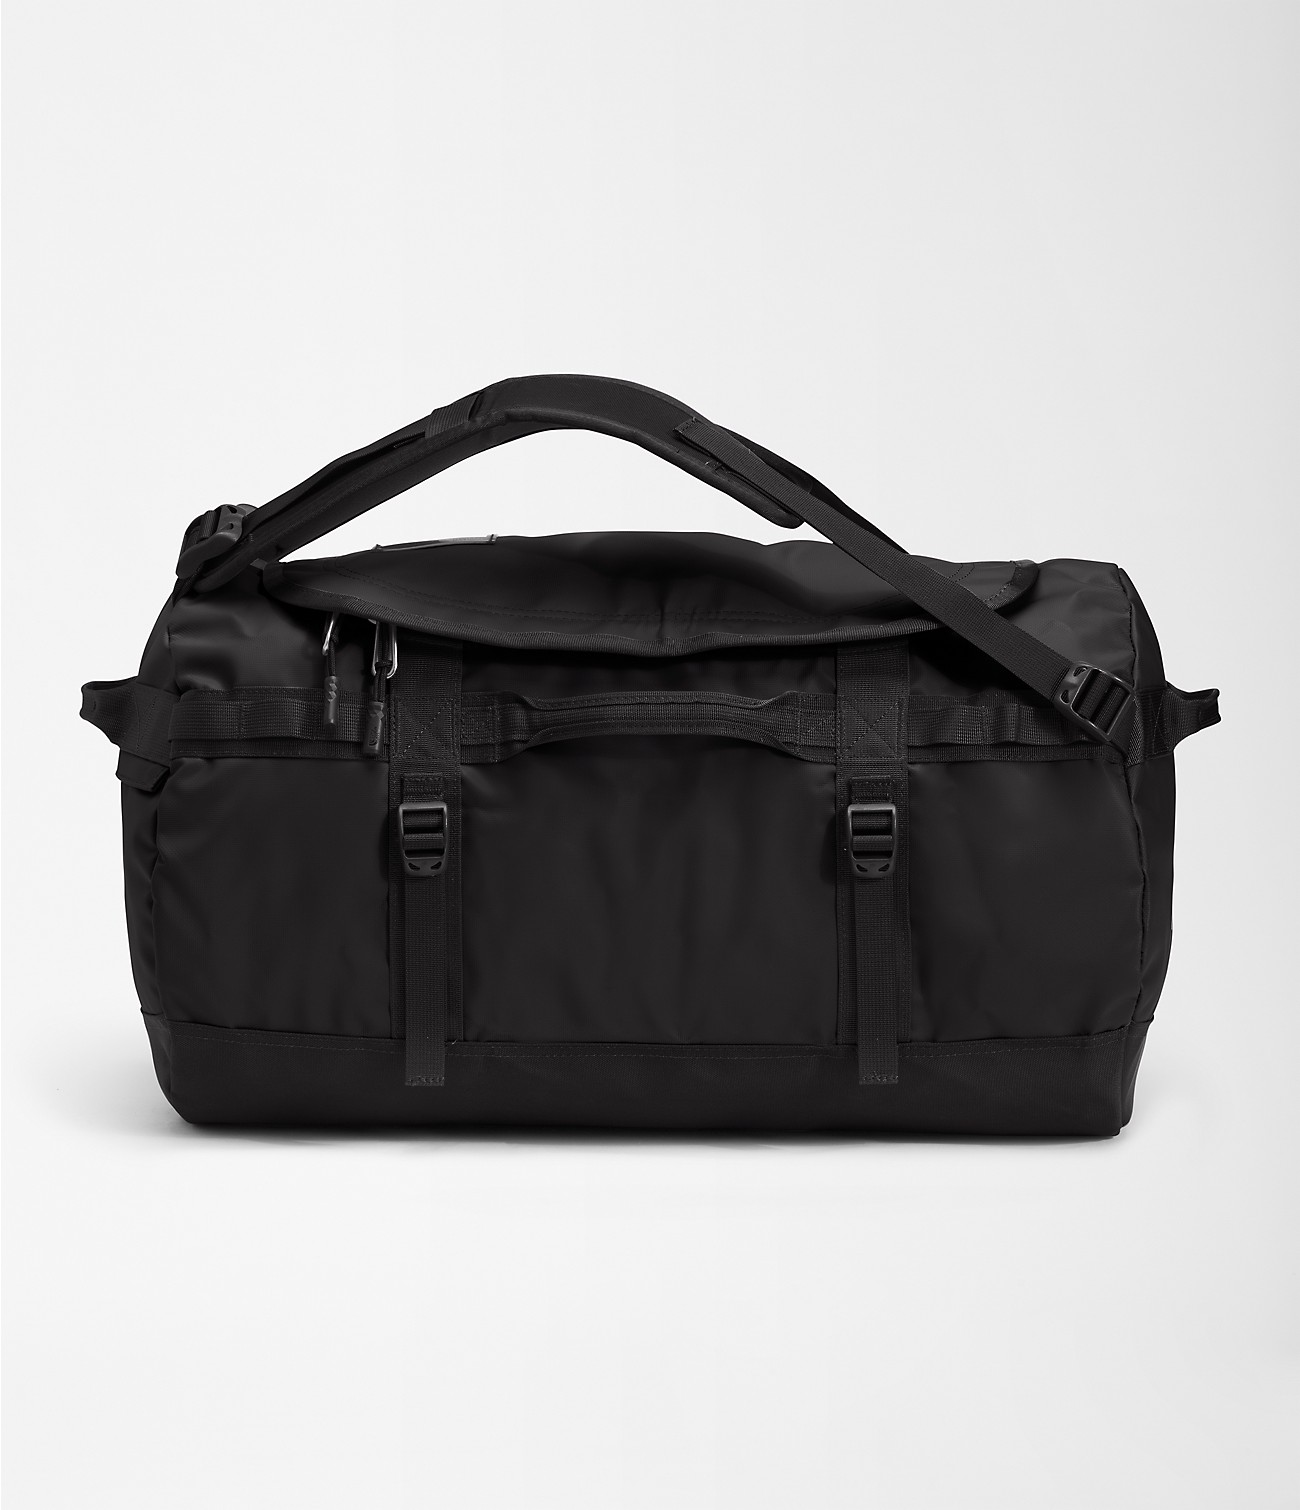 Unlock Wilderness' choice in the Decathlon Vs North Face comparison, the Base Camp Duffel—S by The North Face